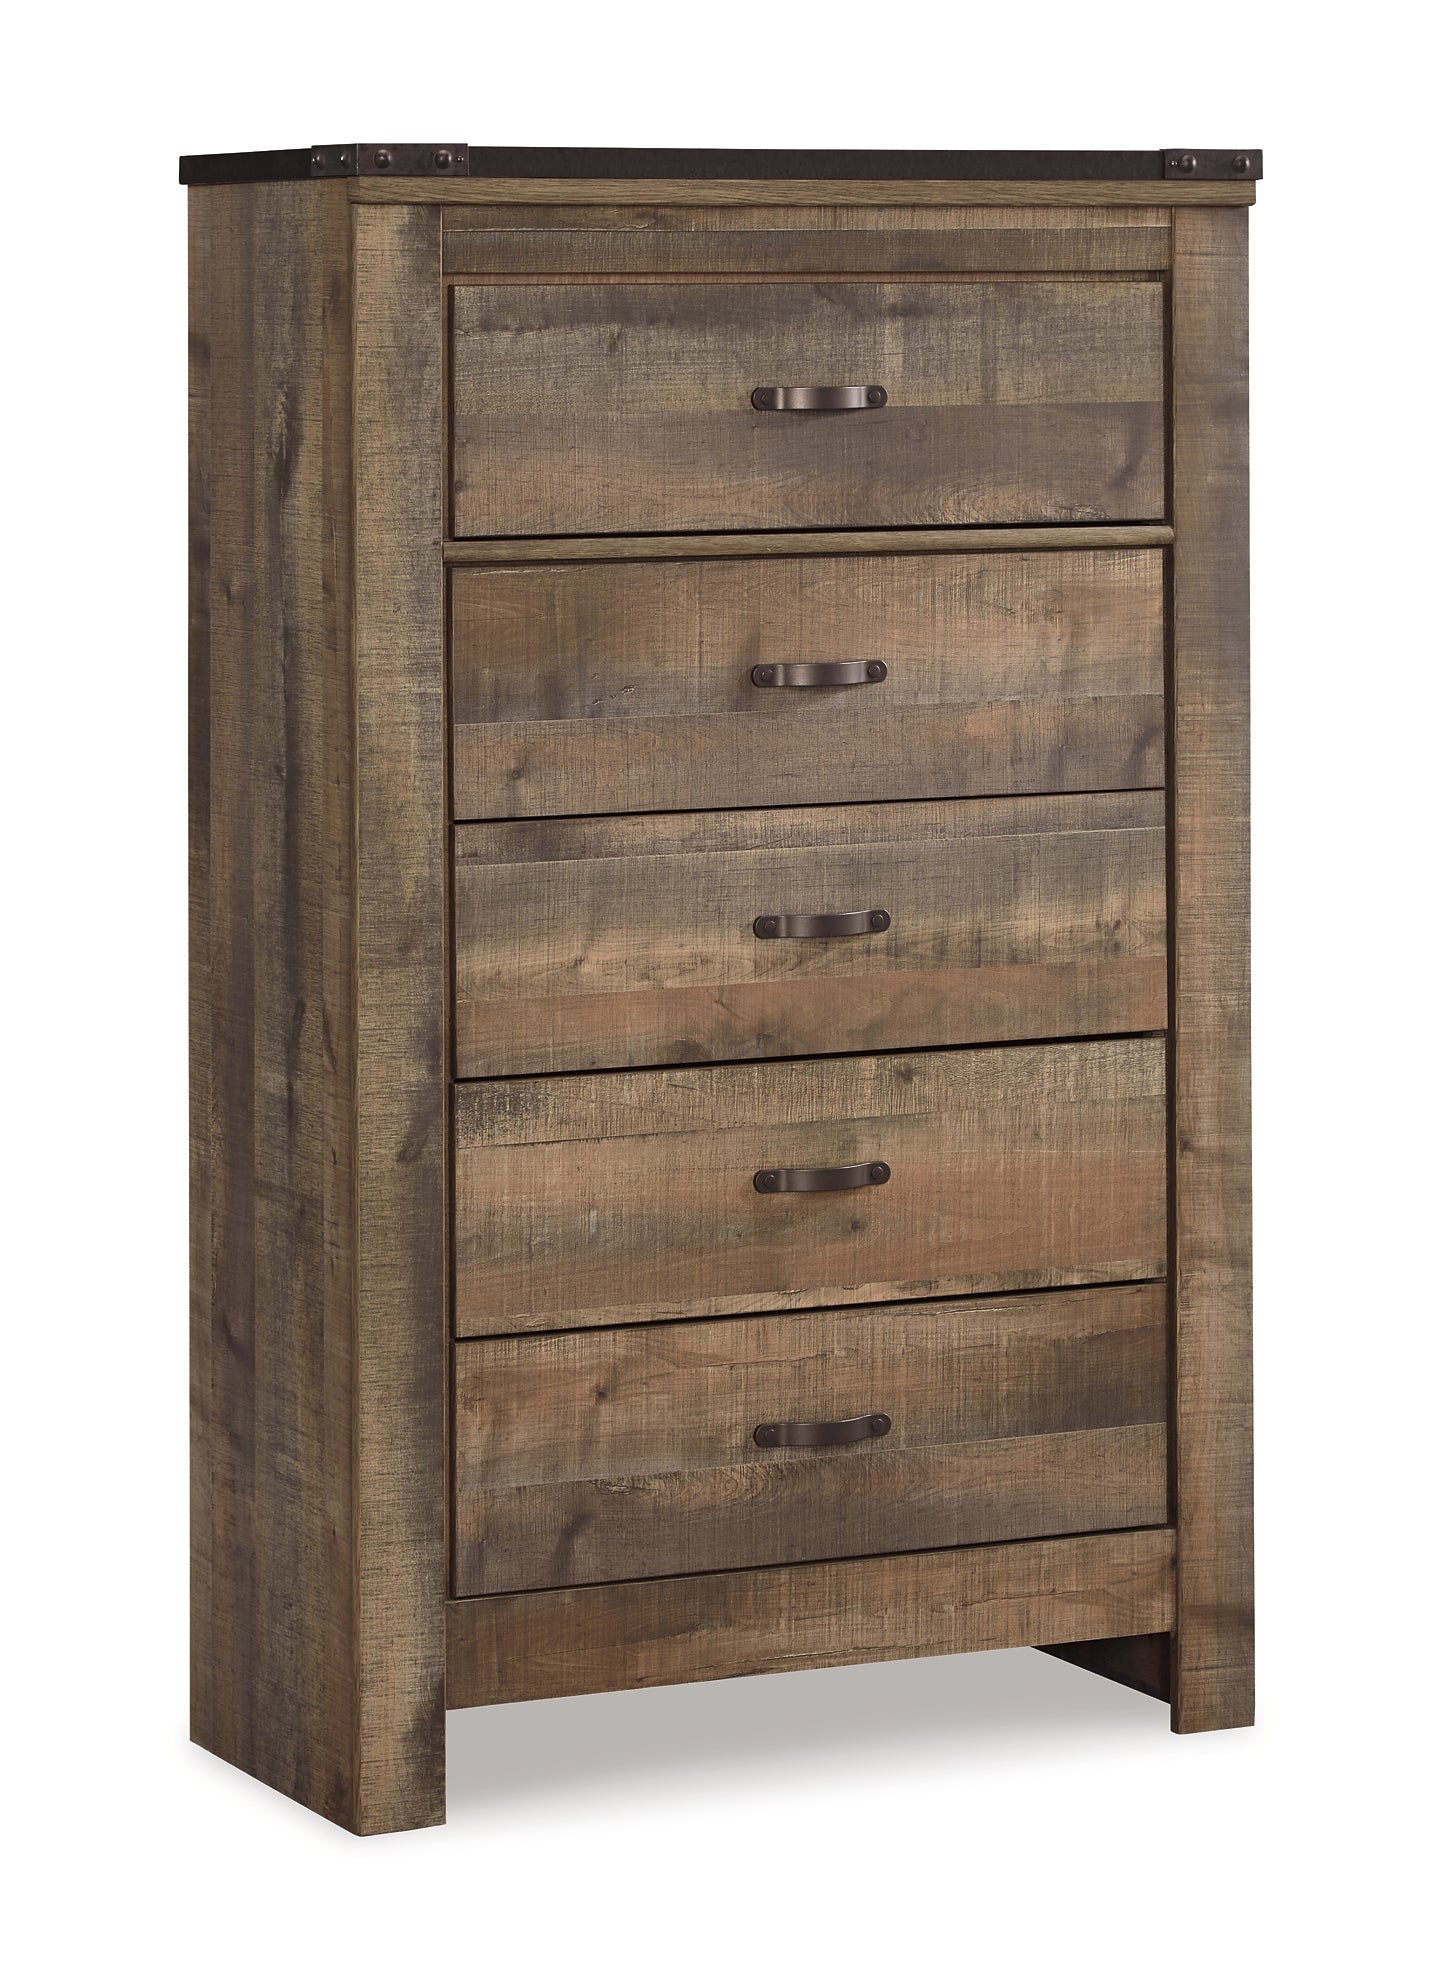 Trinell King Panel Bed with Dresser and Chest